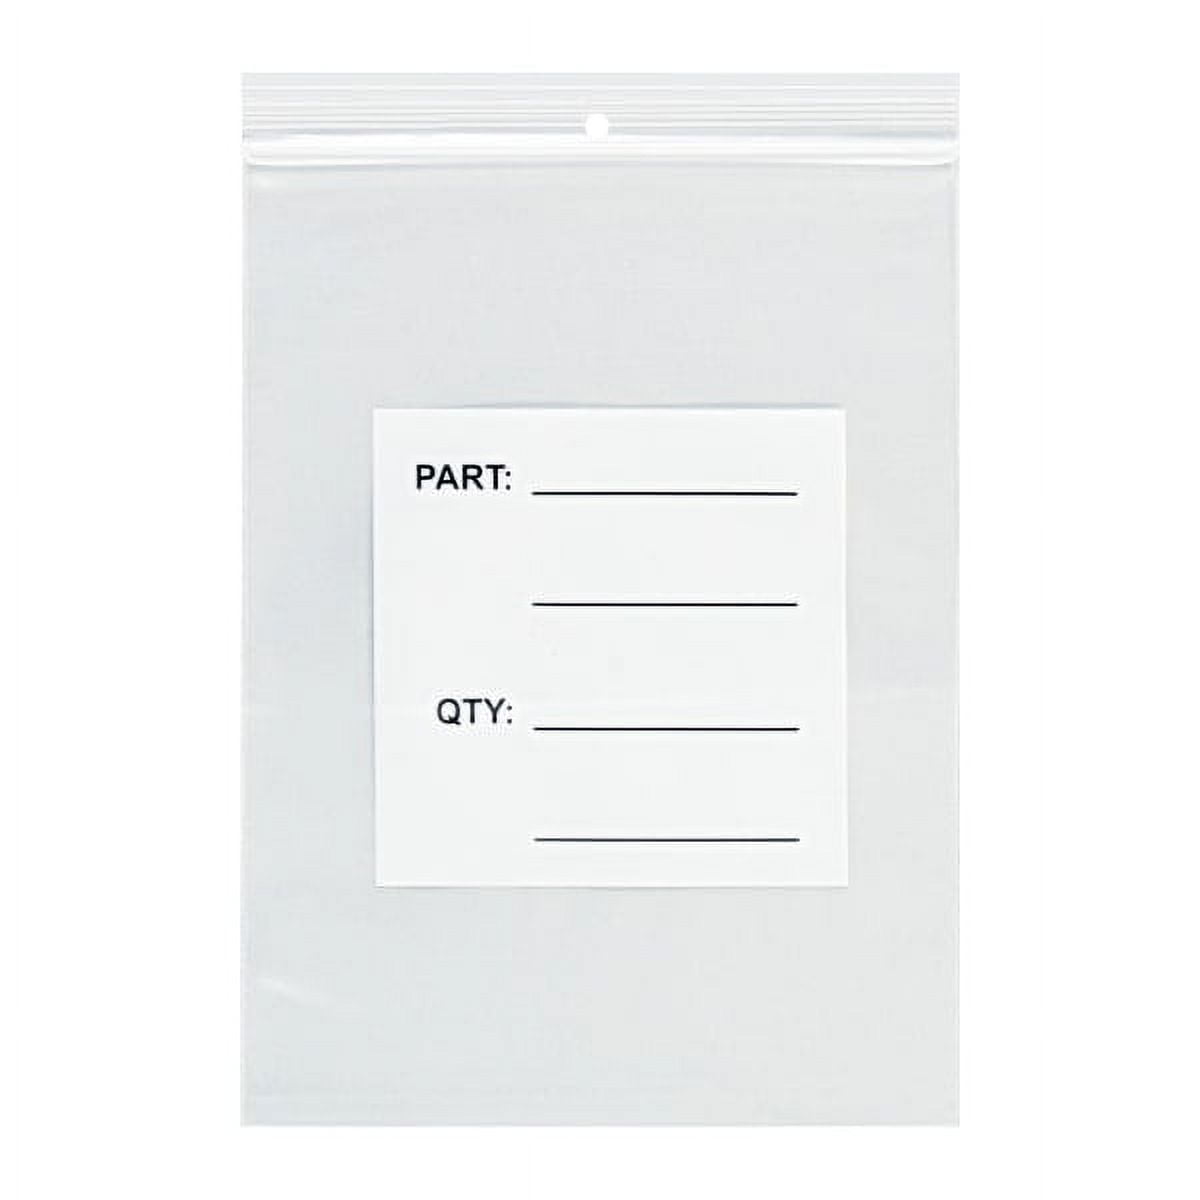 Pb12008 8 X 10 In. 4 Mil Parts Bags With Hang Holes - Pack Of 1000